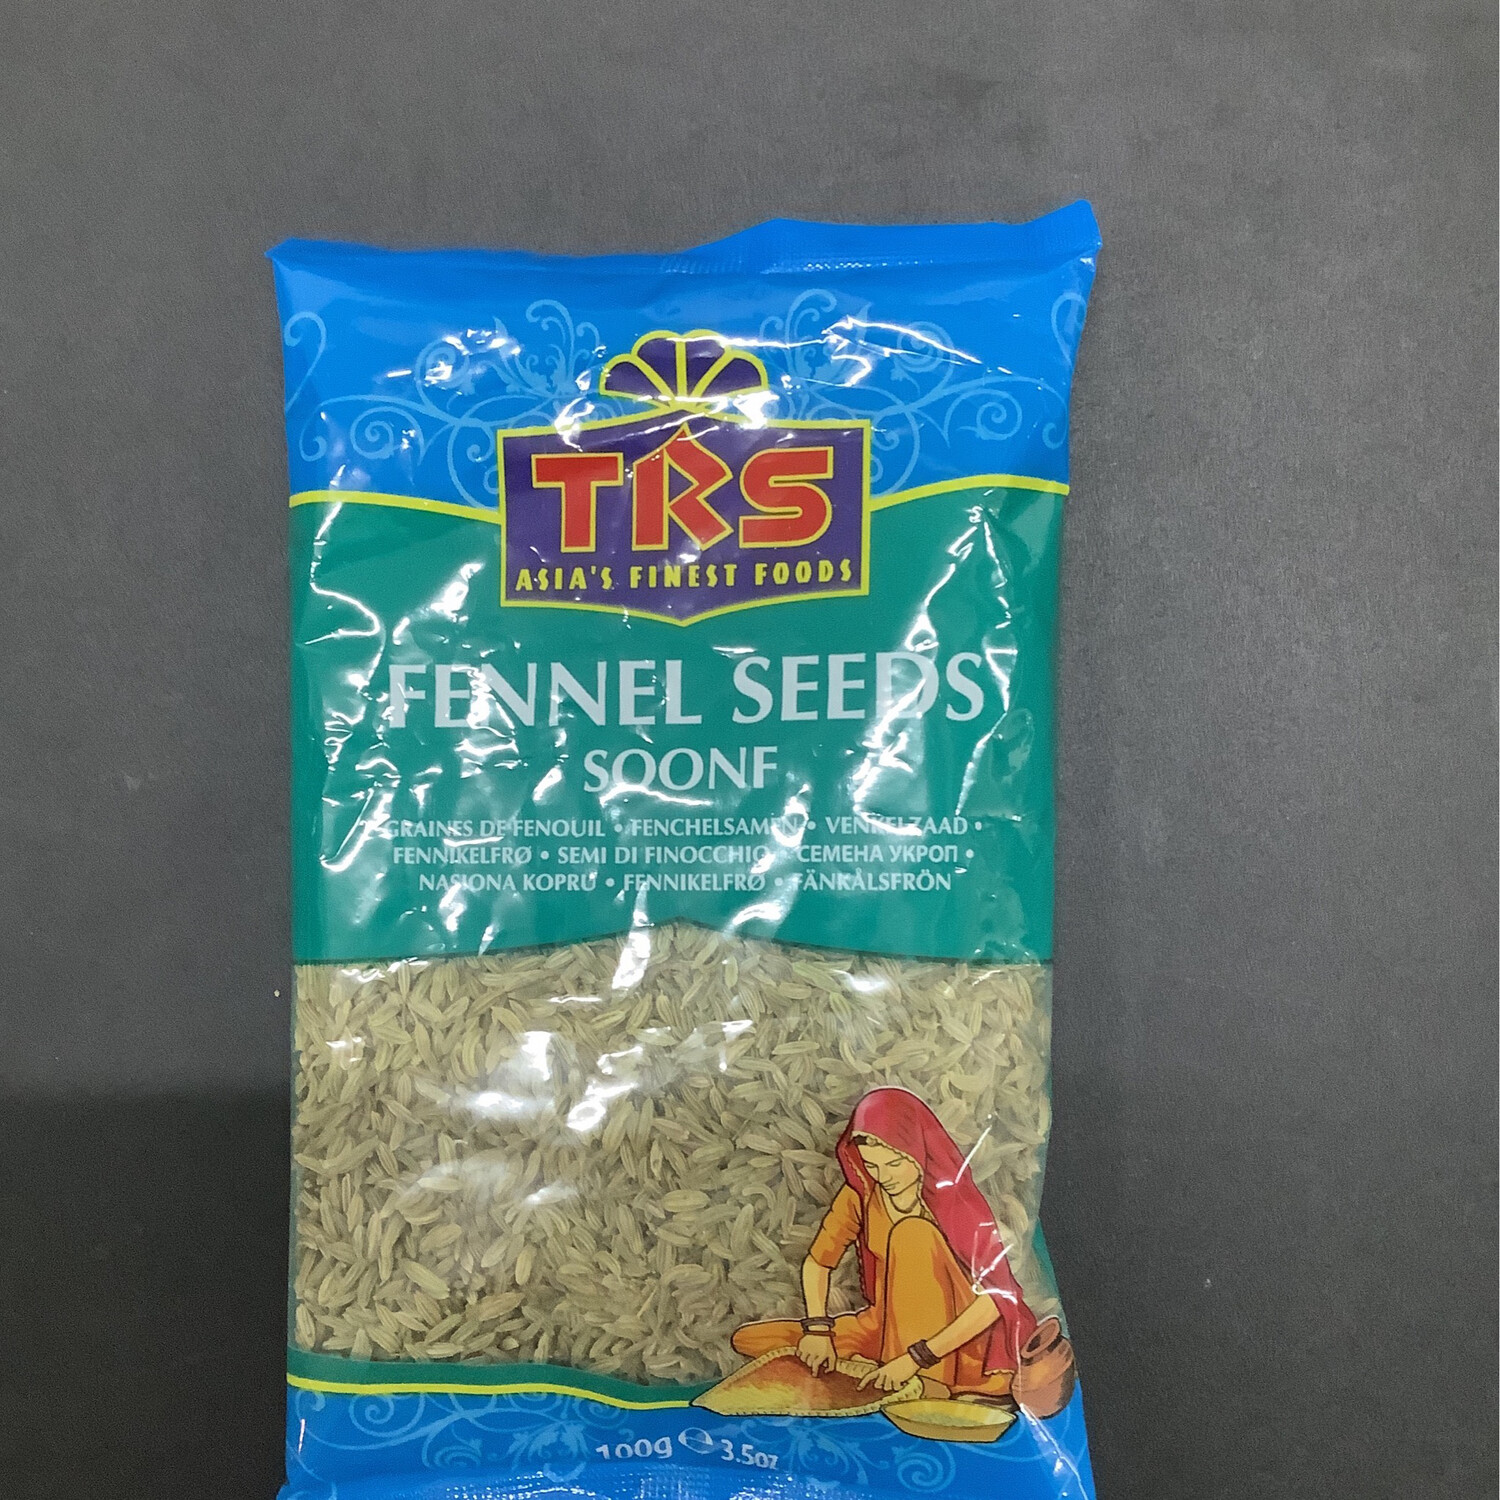 TRS Fennel Seeds Soonf 100g